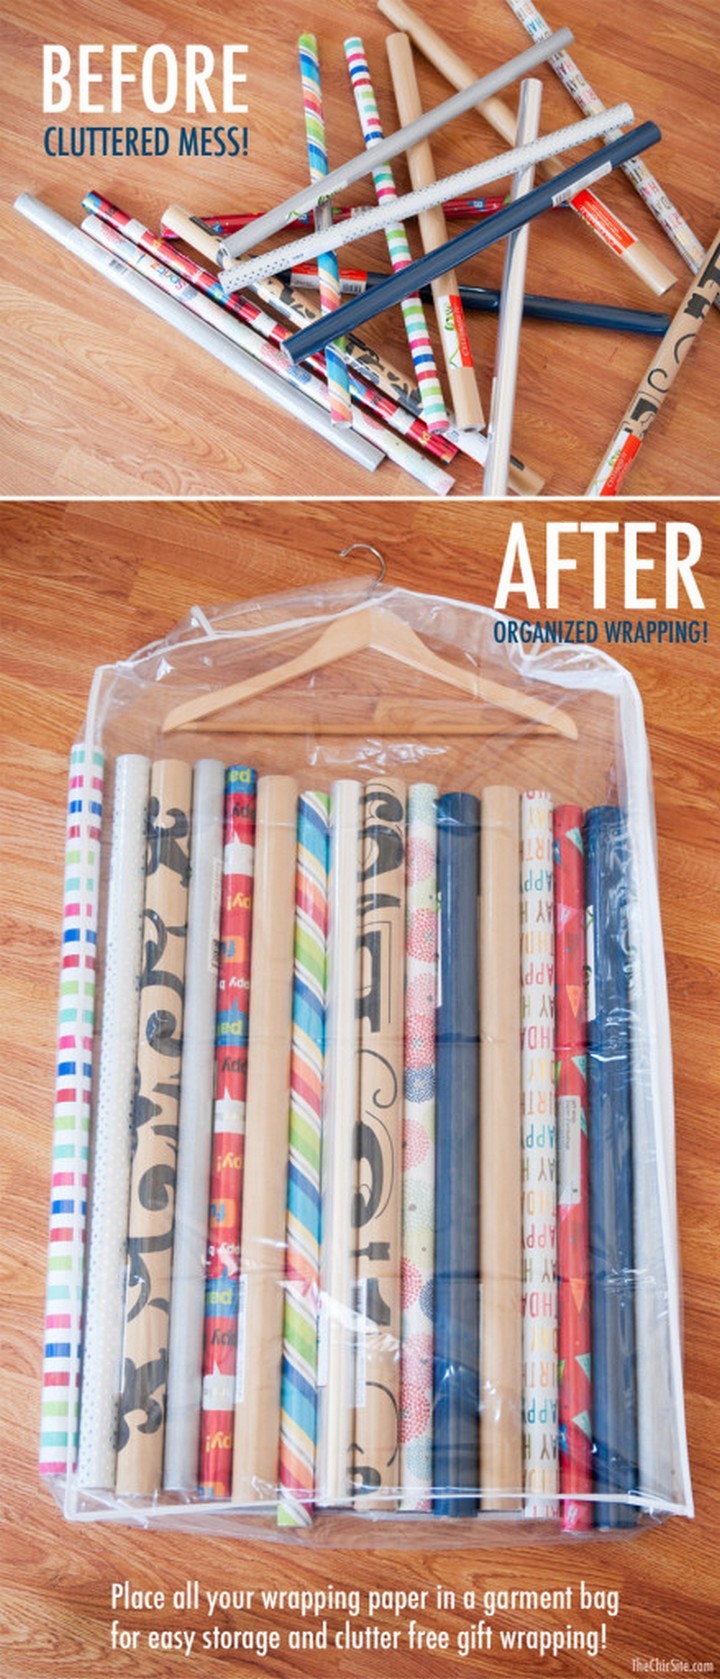 46 Useful Storage Ideas - Store all your wrapping paper in a garment bag.